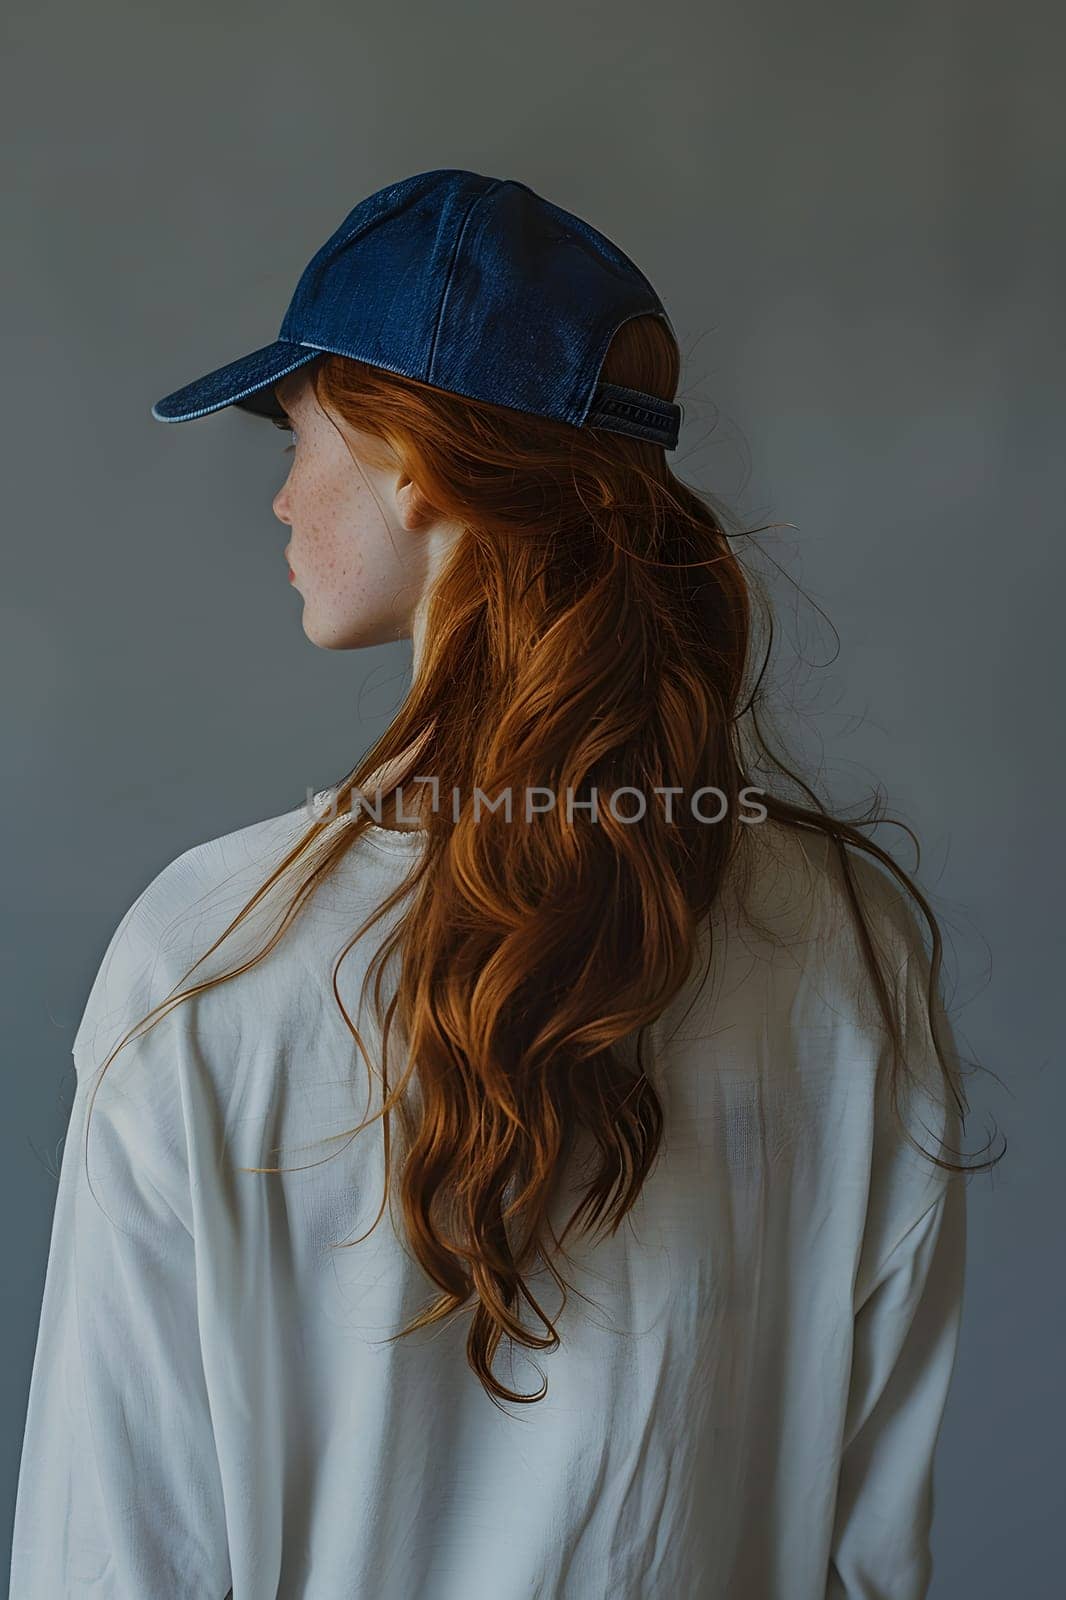 The woman, with her long red hair, is stylishly dressed in a white shirt and blue baseball cap, complemented by trendy eyewear